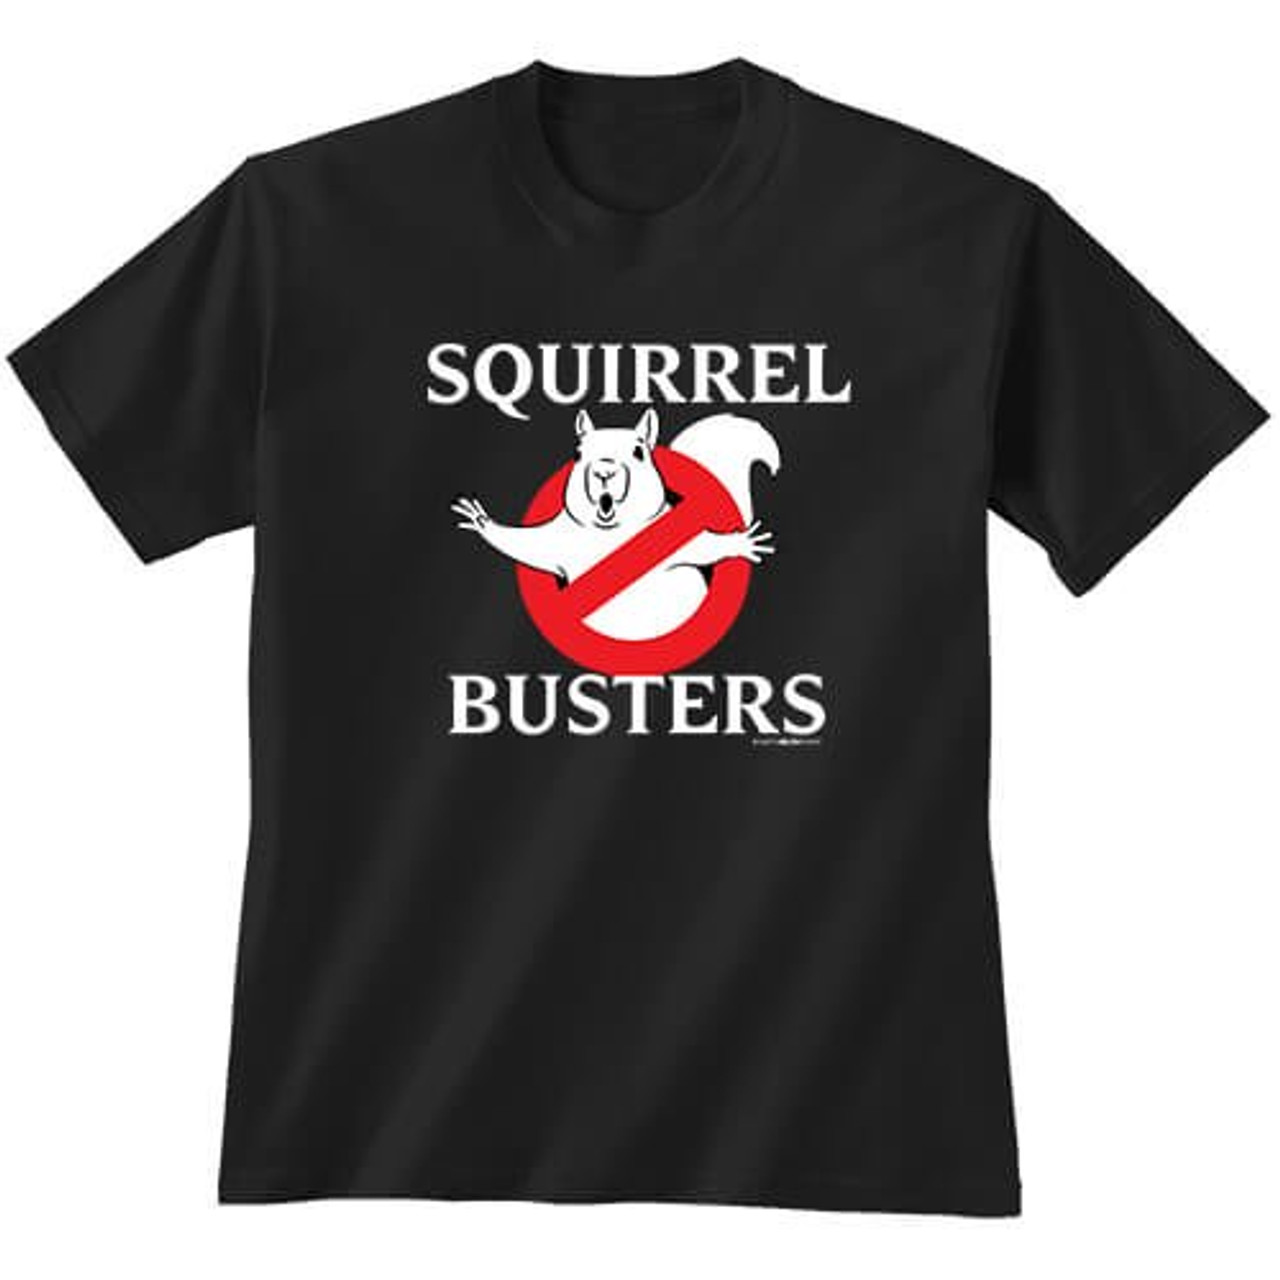 Squirrel Busters T Shirt